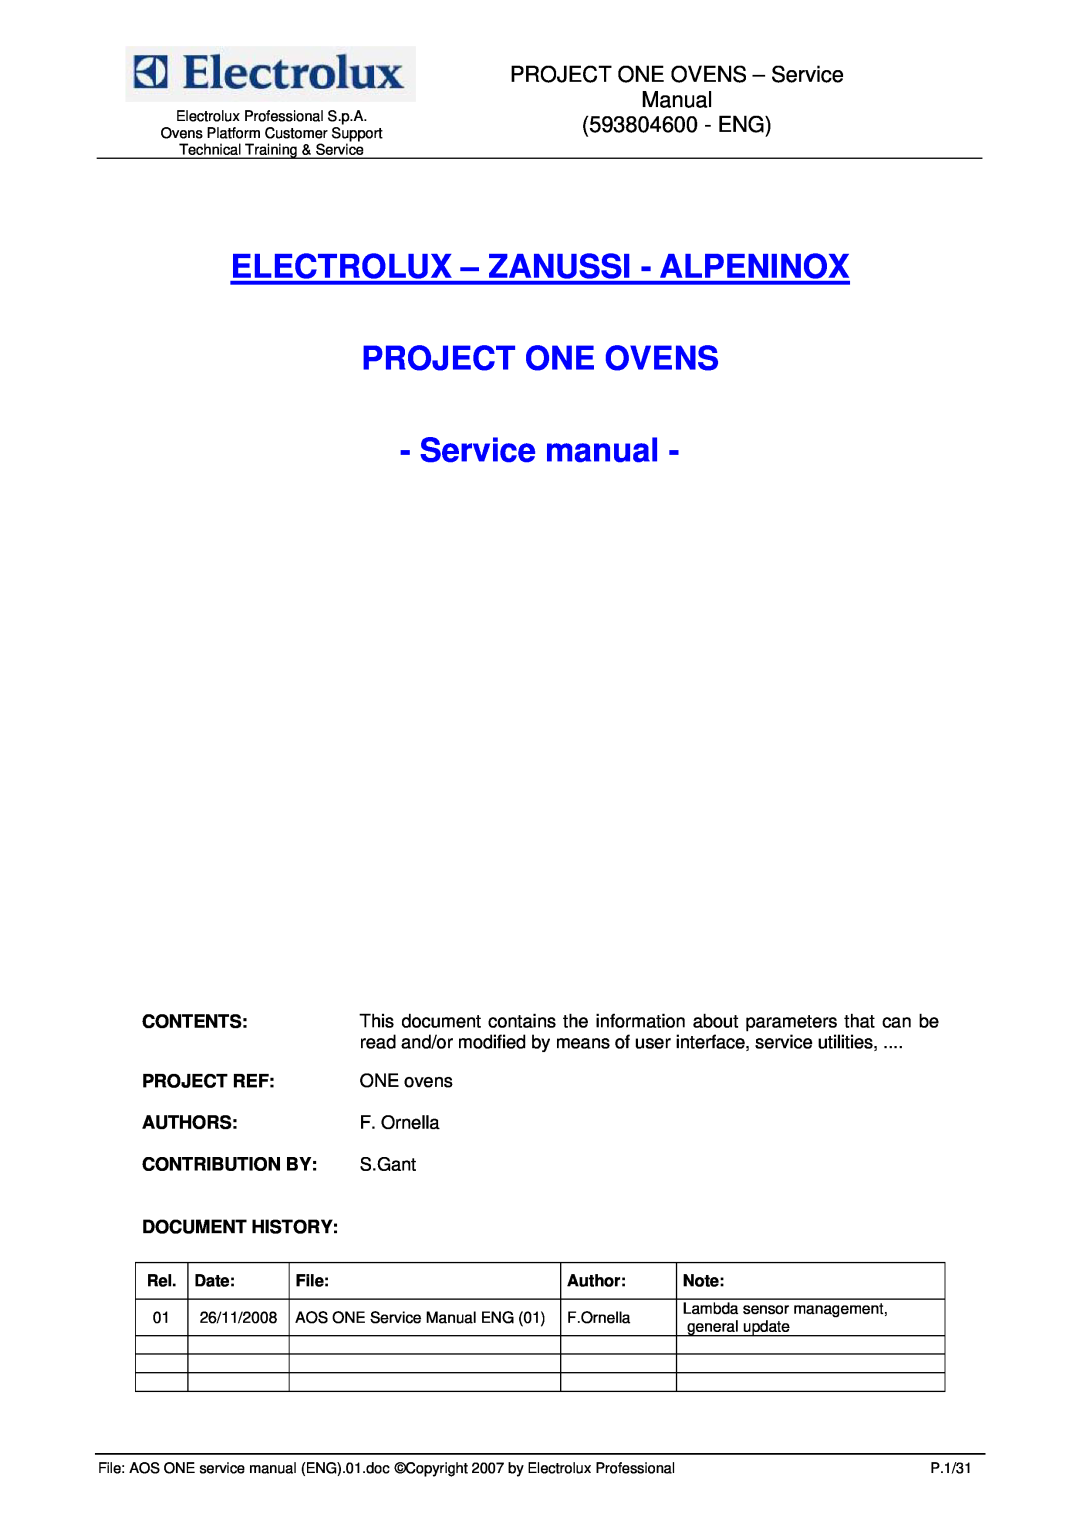 Electrolux service manual PROJECT ONE OVENS - Service Manual 593804600 - ENG, Date, File, Author 